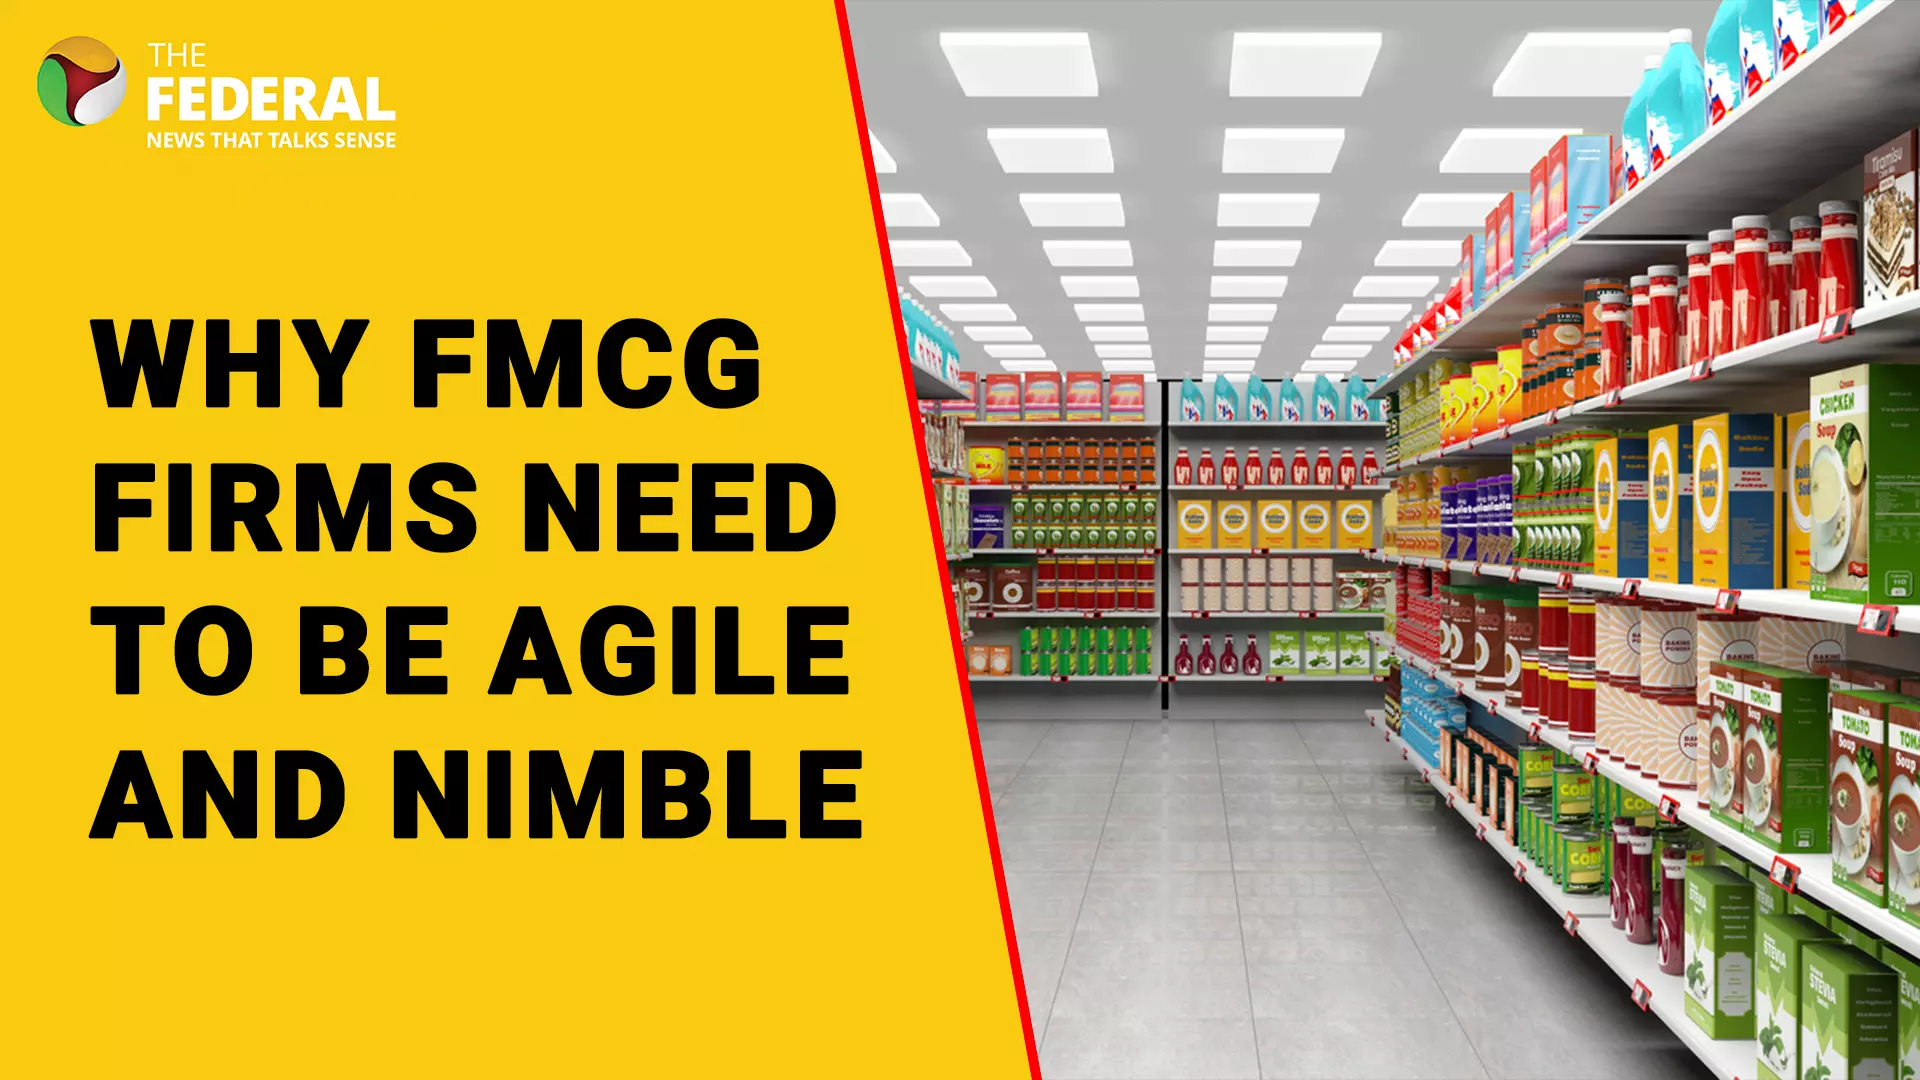 Why FMCG firms need to be agile and nimble